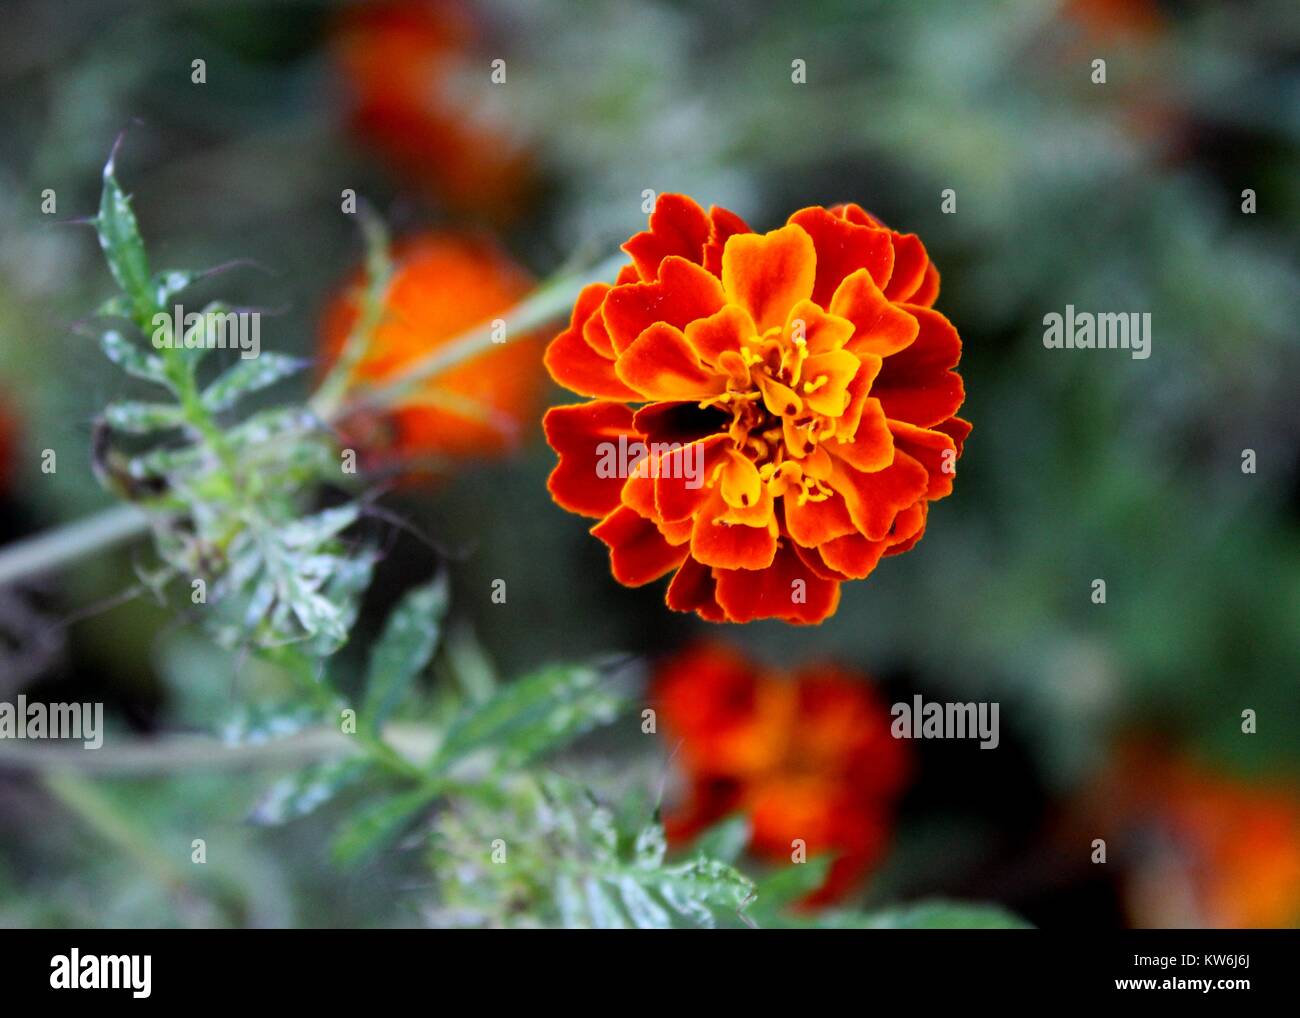 macro - close-up view of  beautiful yellow - orange color french marigold - Tagetes patula - flower - petals in a bungalow garden Stock Photo